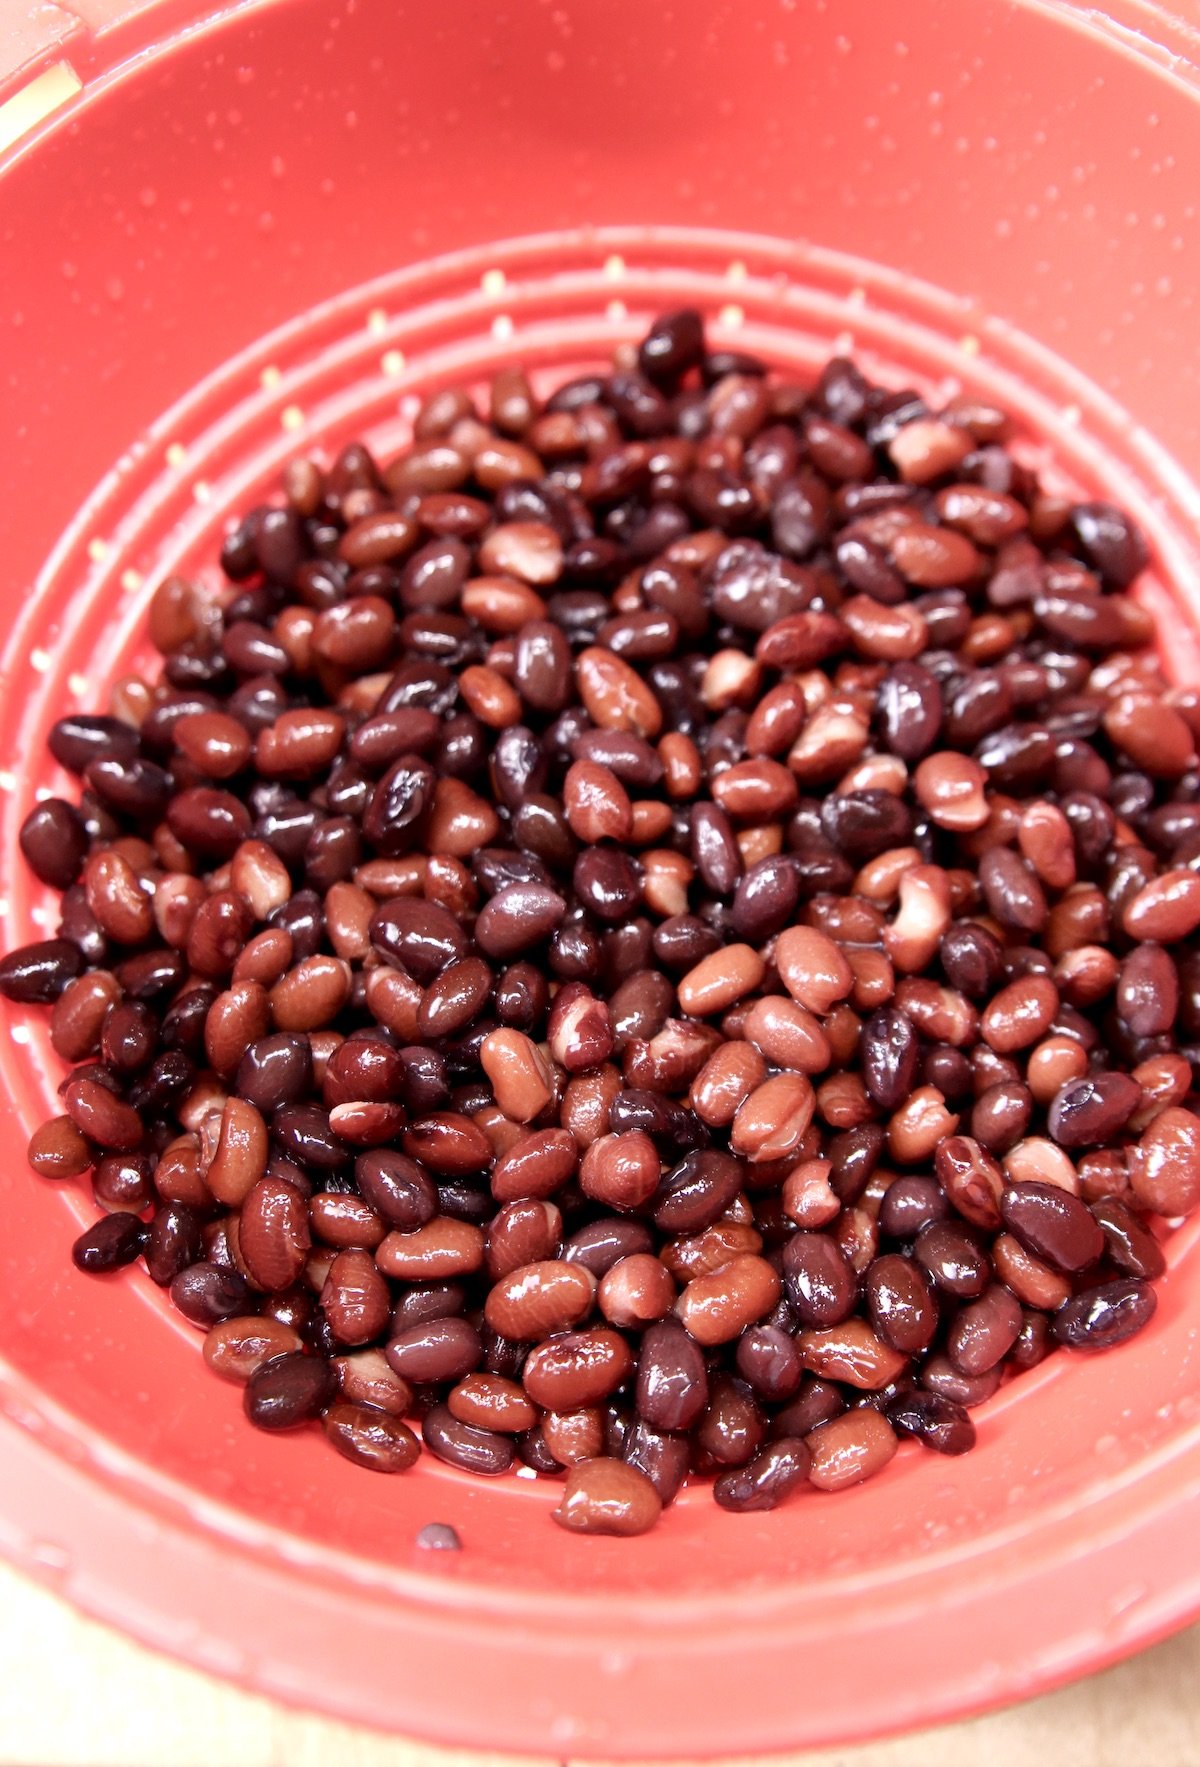 black beans in a red colander